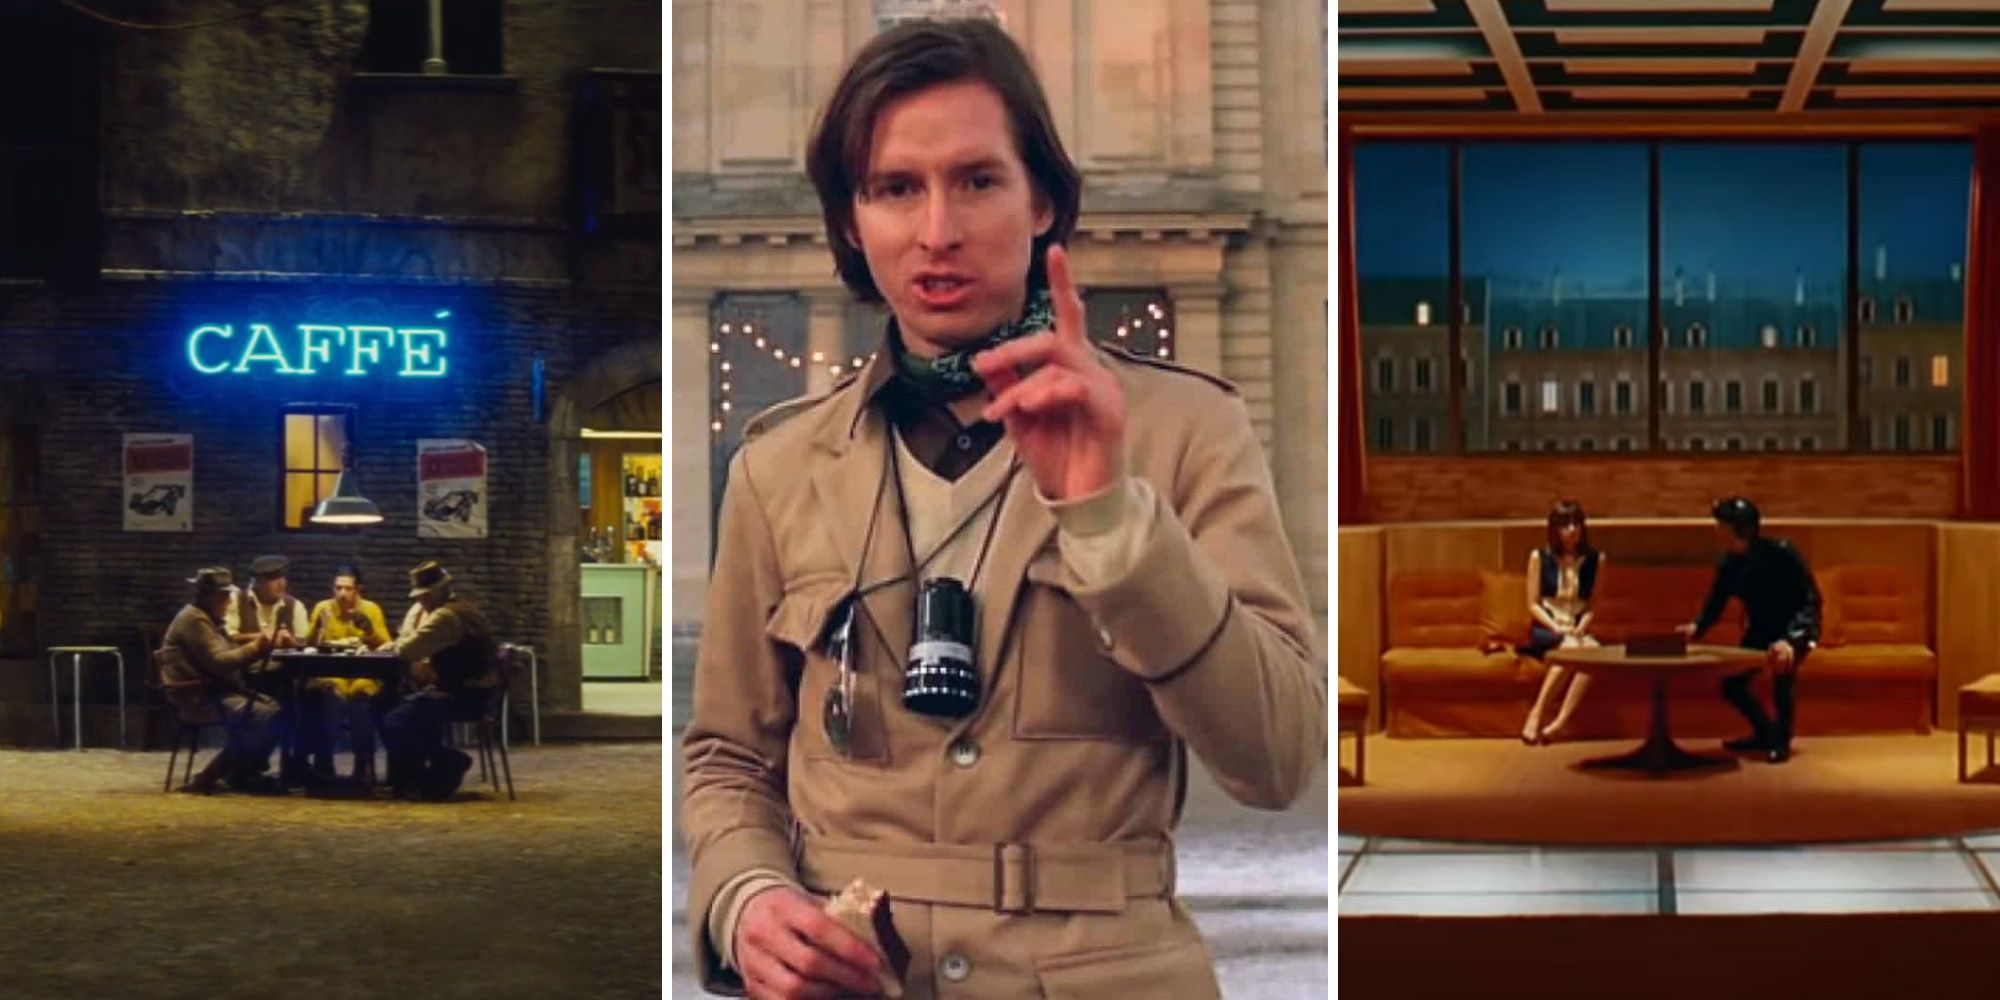 Accompany Wes Anderson on a stroll through a video store in Paris